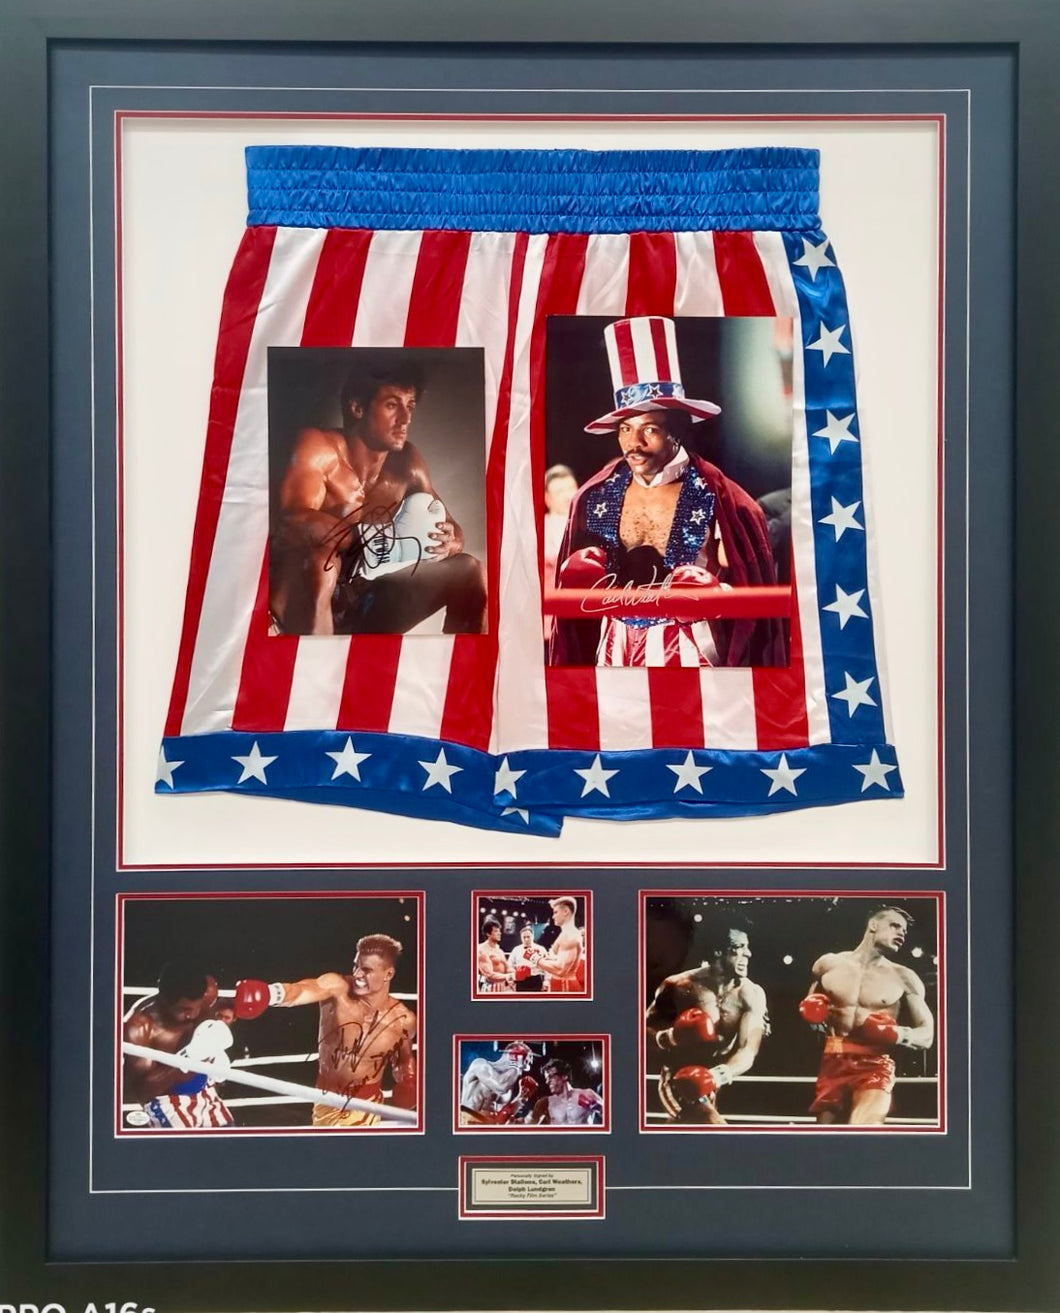 ROCKY - SYLVESTER STALLONE, CARL WEATHERS & DOLPH LUNDGREN Signed Photos Collage Display